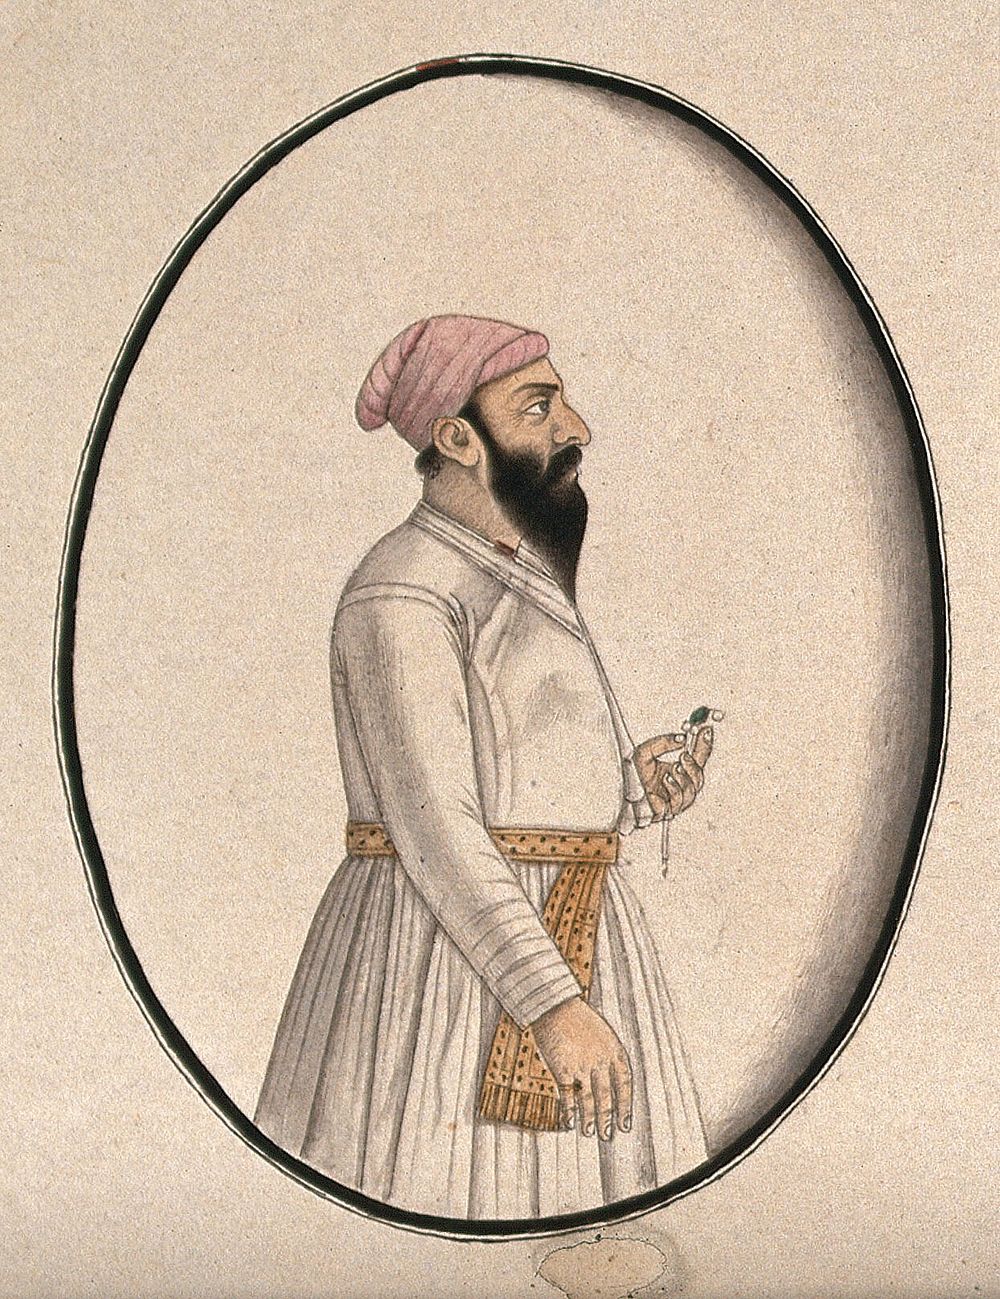 A Mughal courtier wearing a pink turban and holding an ornament . Watercolour drawing by an Indian artist.